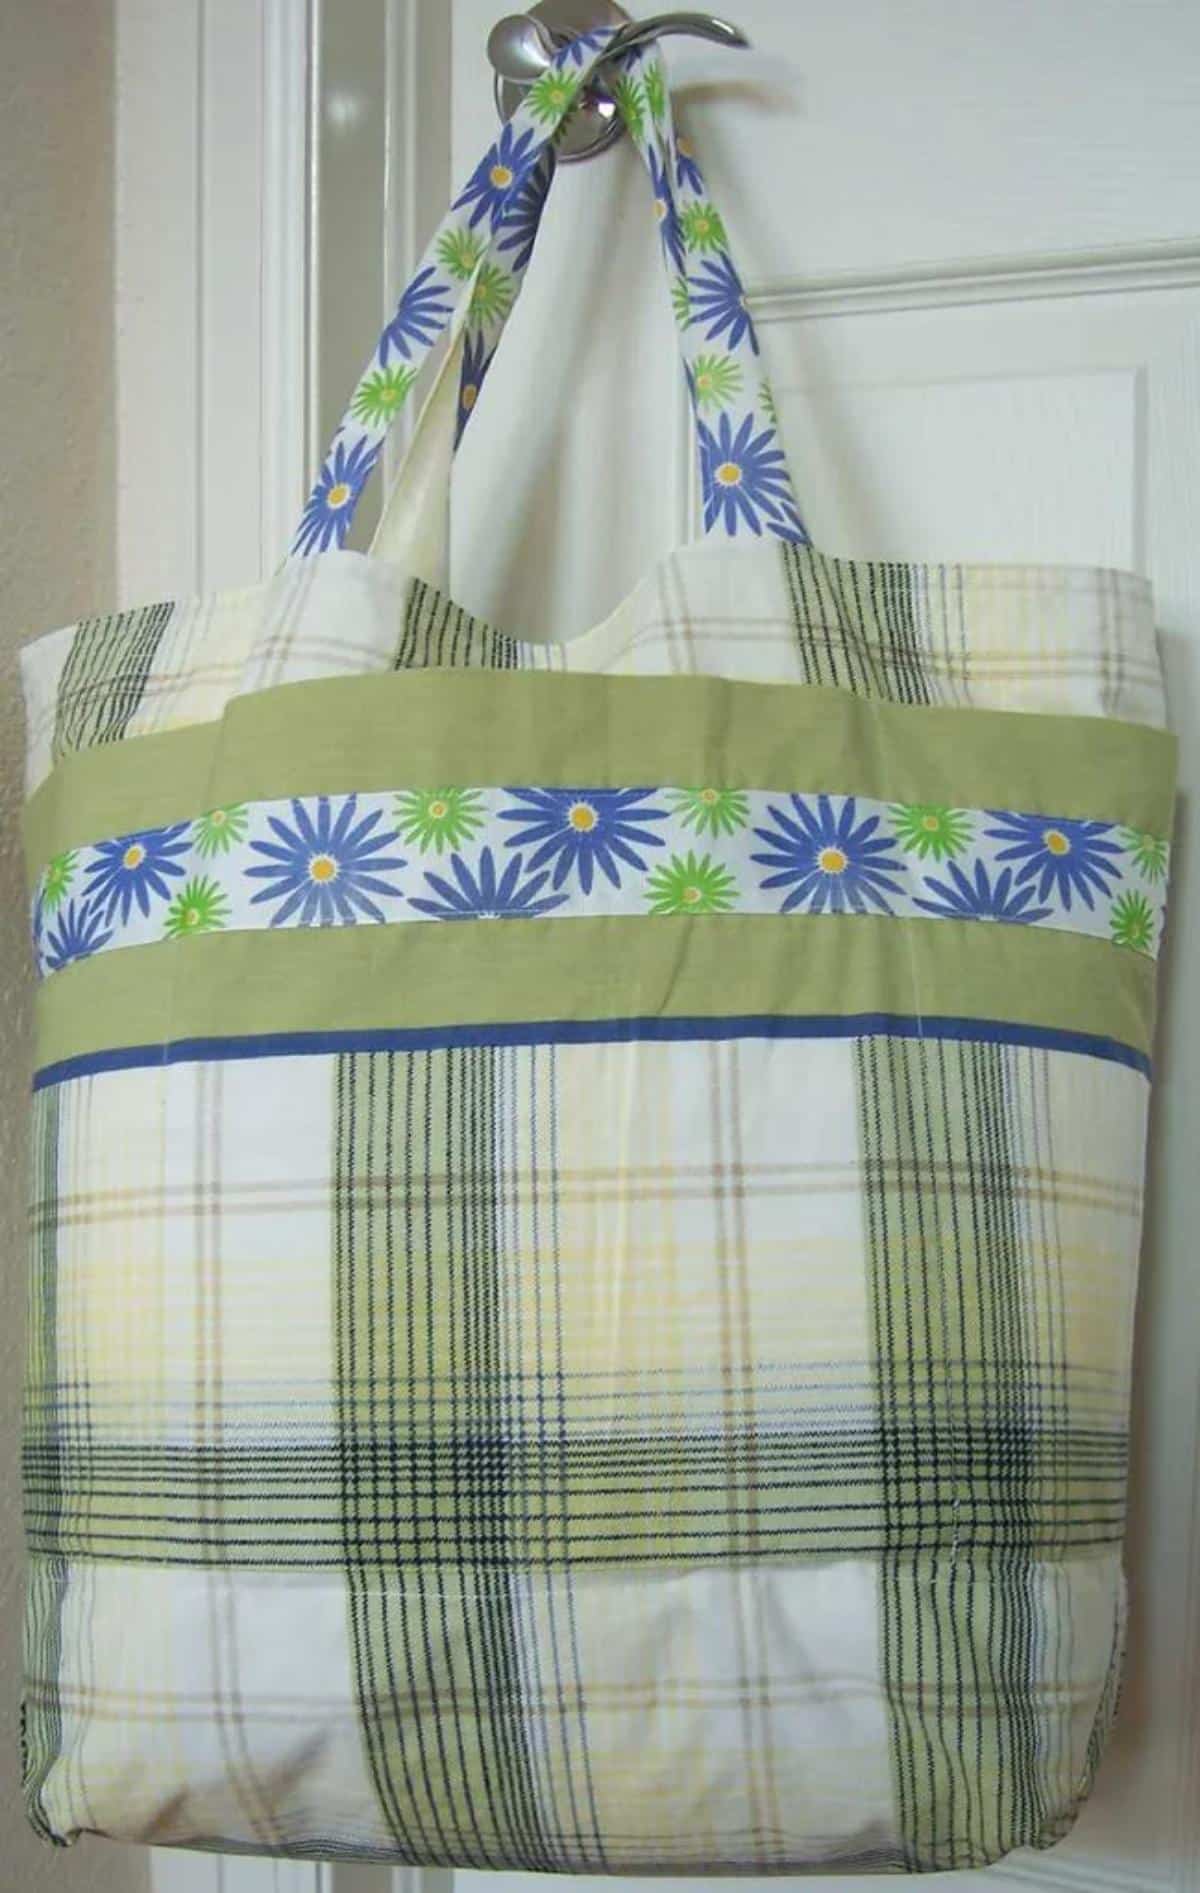 Easy DIY Grocery Bag Shopping Tote From 2 Pillowcases